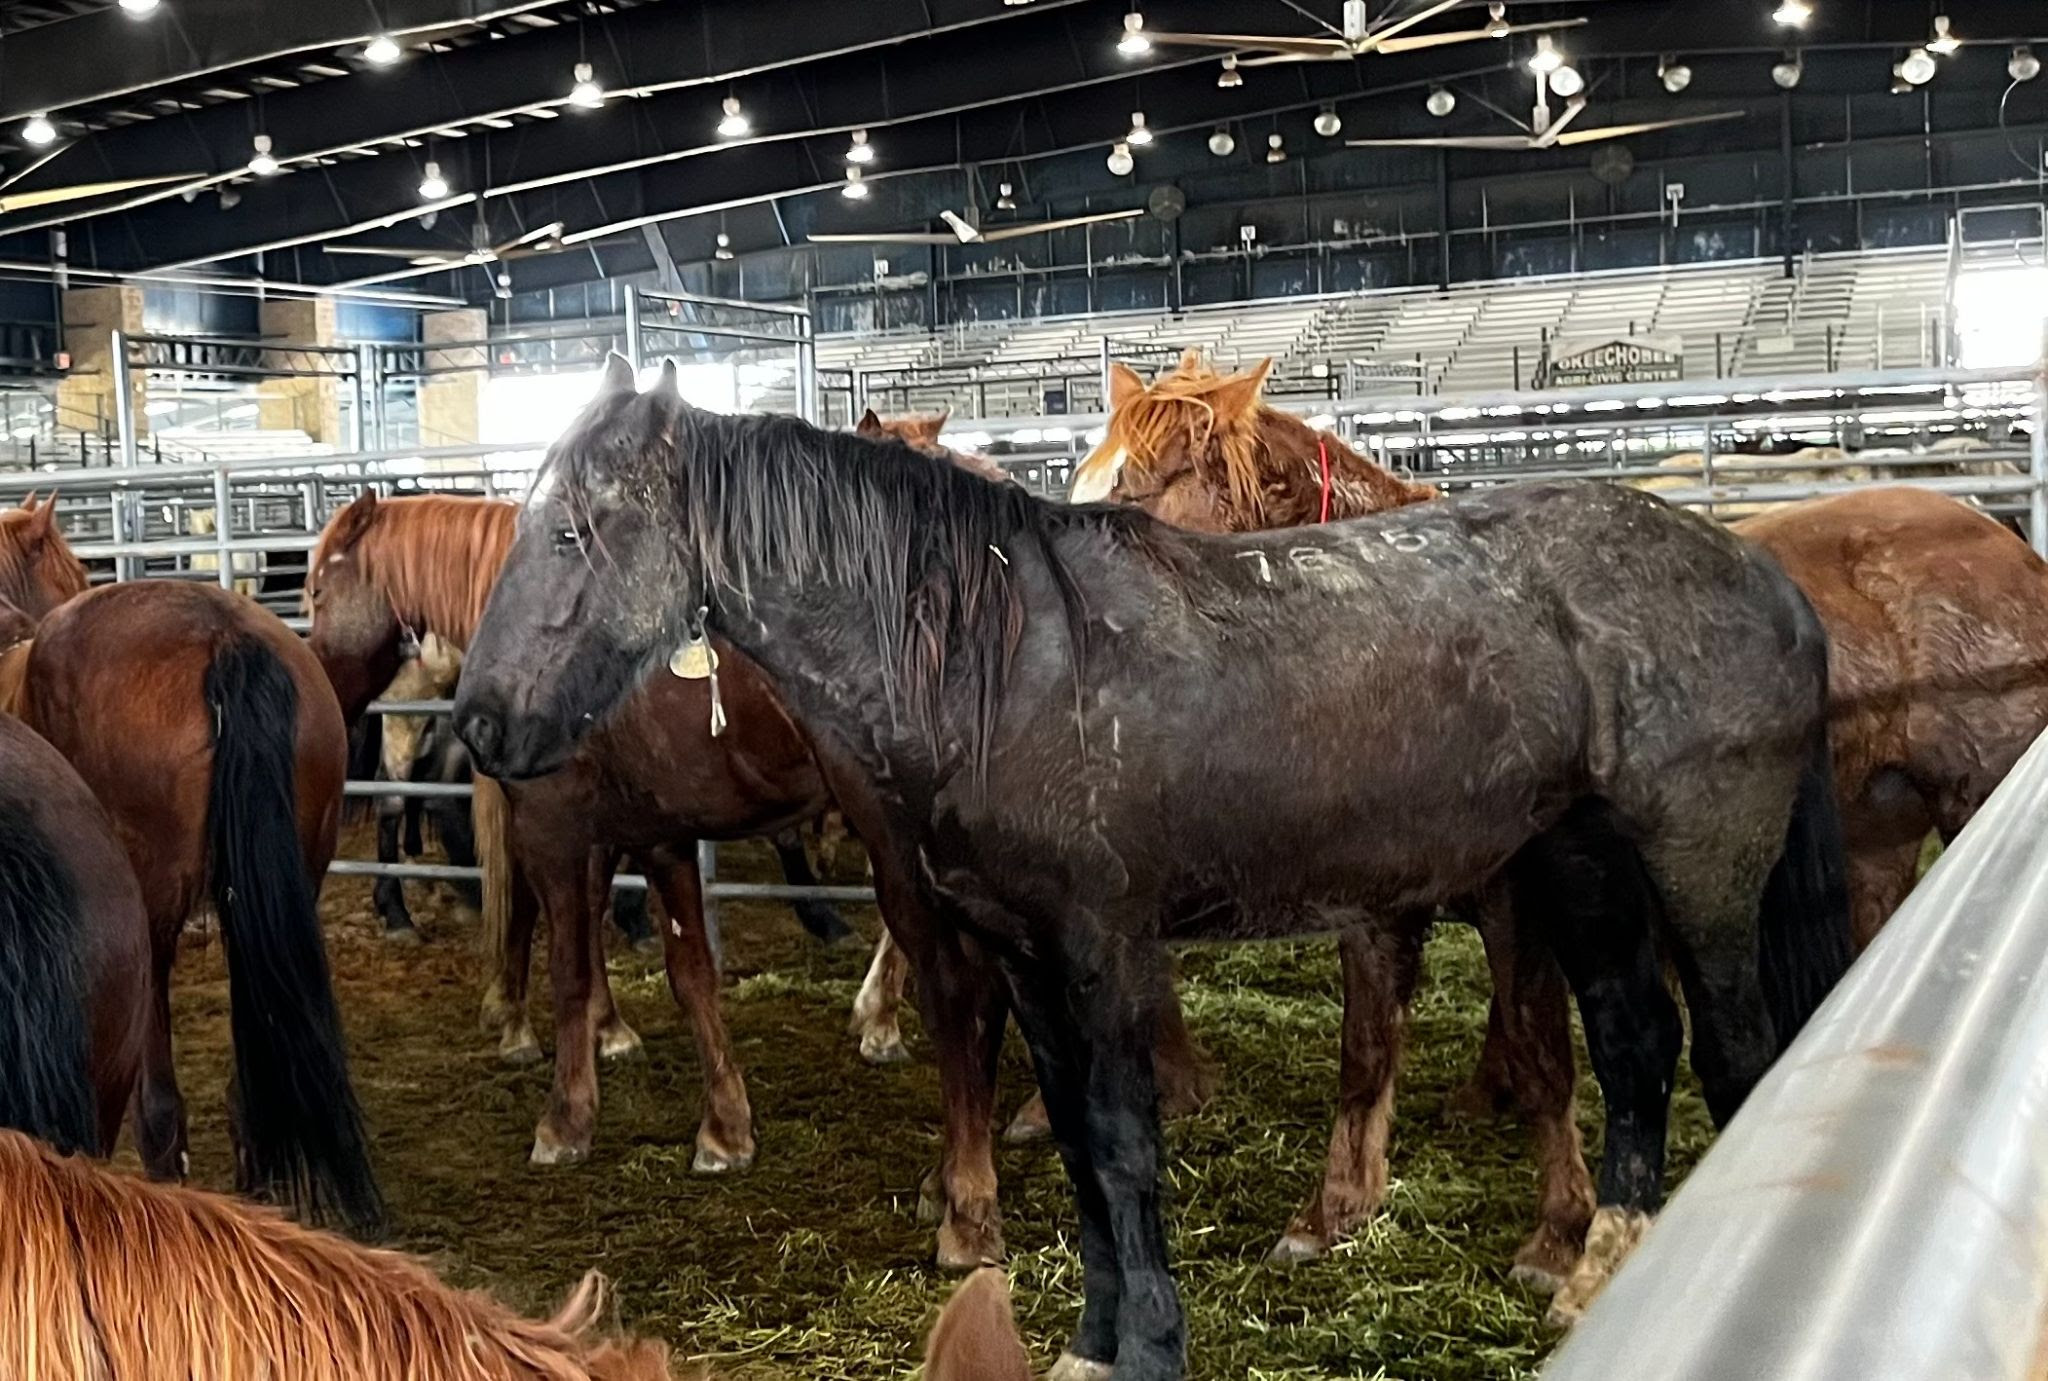 A dark brown stallion stands very close to a handful of other horses all in an enclosed holding pen